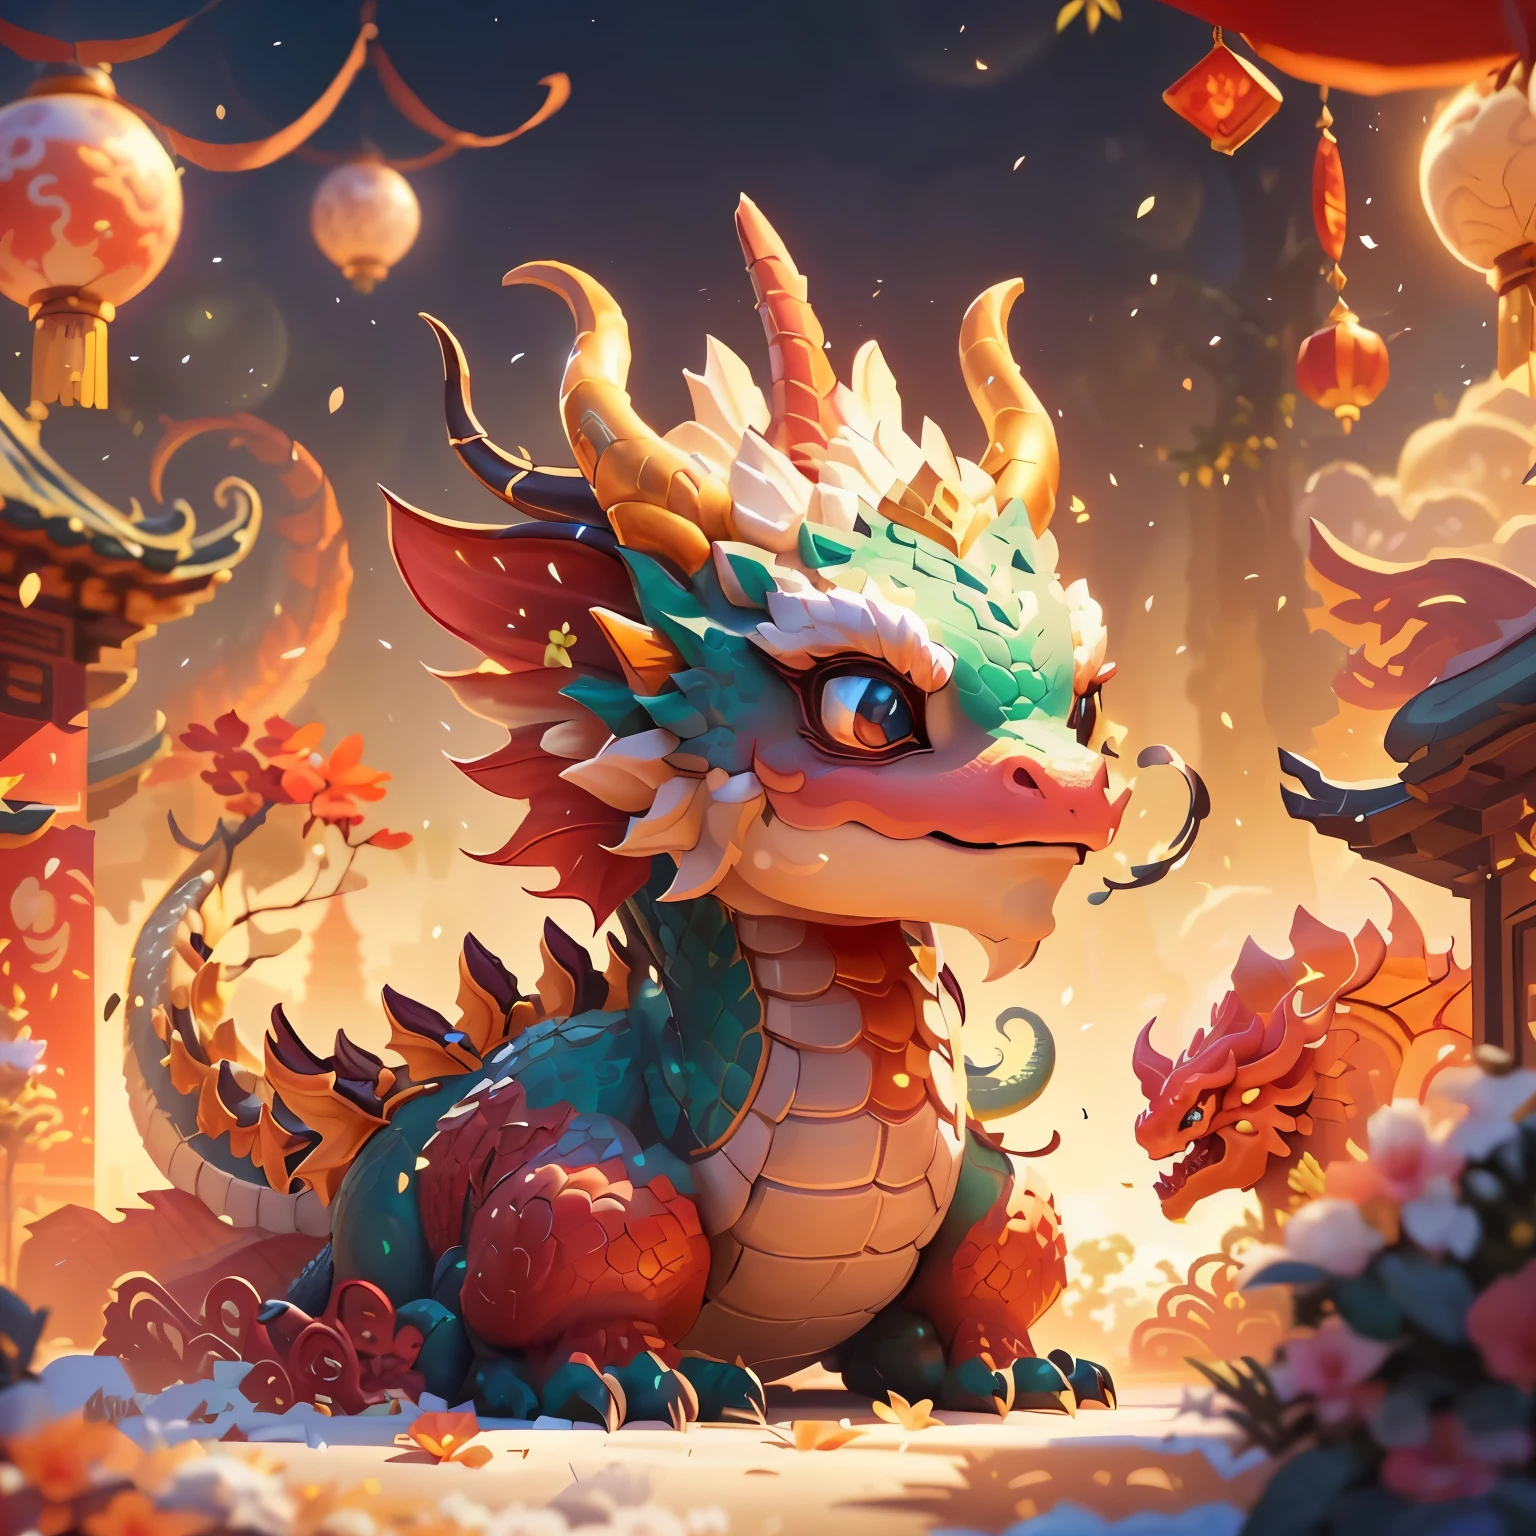 There is a dragon statue in the center of the garden, Cute and detailed digital art, cute little dragon, chinesedragon concept art, lovely digital painting, by Ryan Ye, Popular topics on cgstation, smooth chinesedragon, chinesedragon, [ Trends on CGSociety ]!!, author：Hero, digital painting very detailed, highly detailed digital painting, rossdraws global illumination